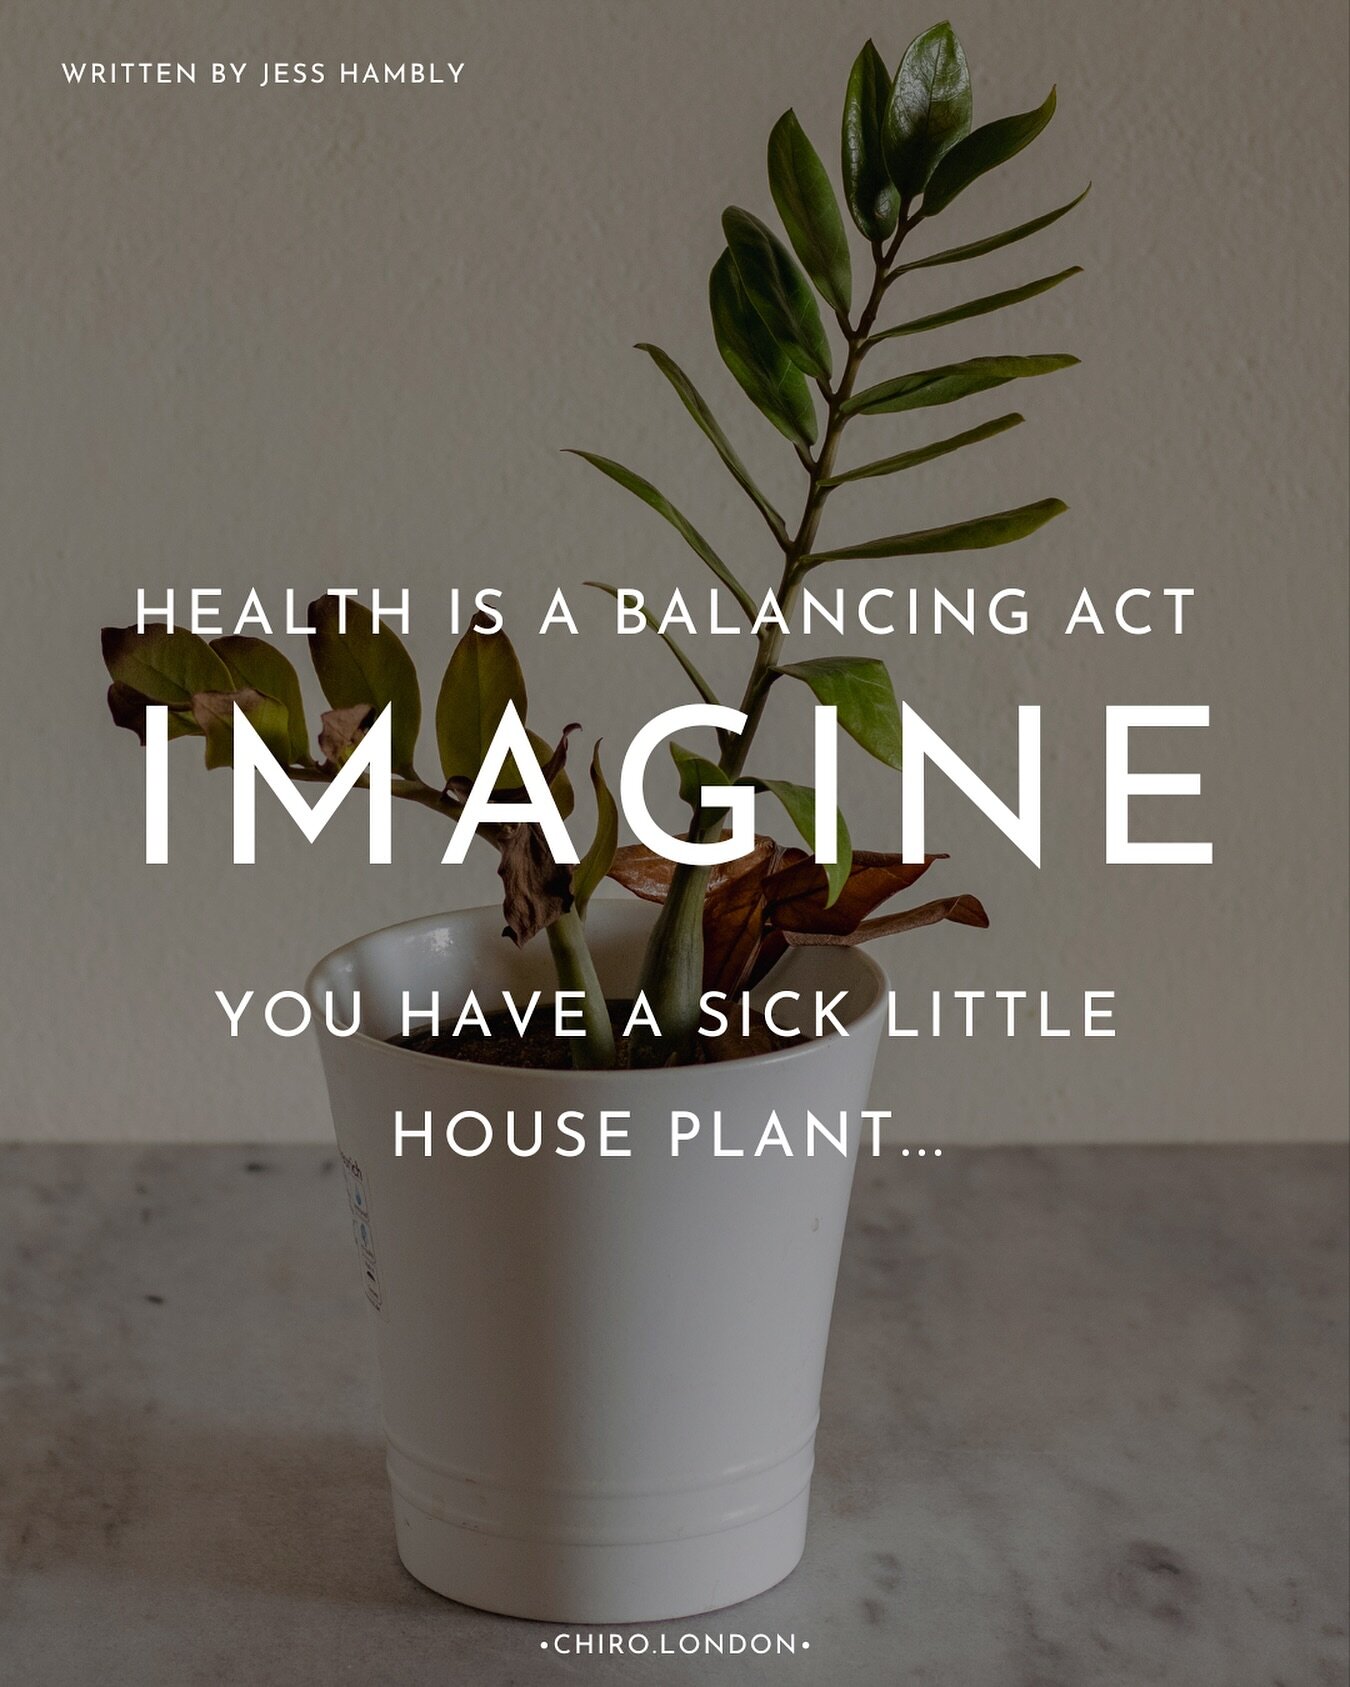 Imagine you have a sick little house plant. Its drooping the leaves are brown. What would you do? 🥀

Perhaps you&rsquo;d give it some more water. But it&rsquo;s still dropping and sad, does that mean water didn&rsquo;t help? 

You didn&rsquo;t ferti